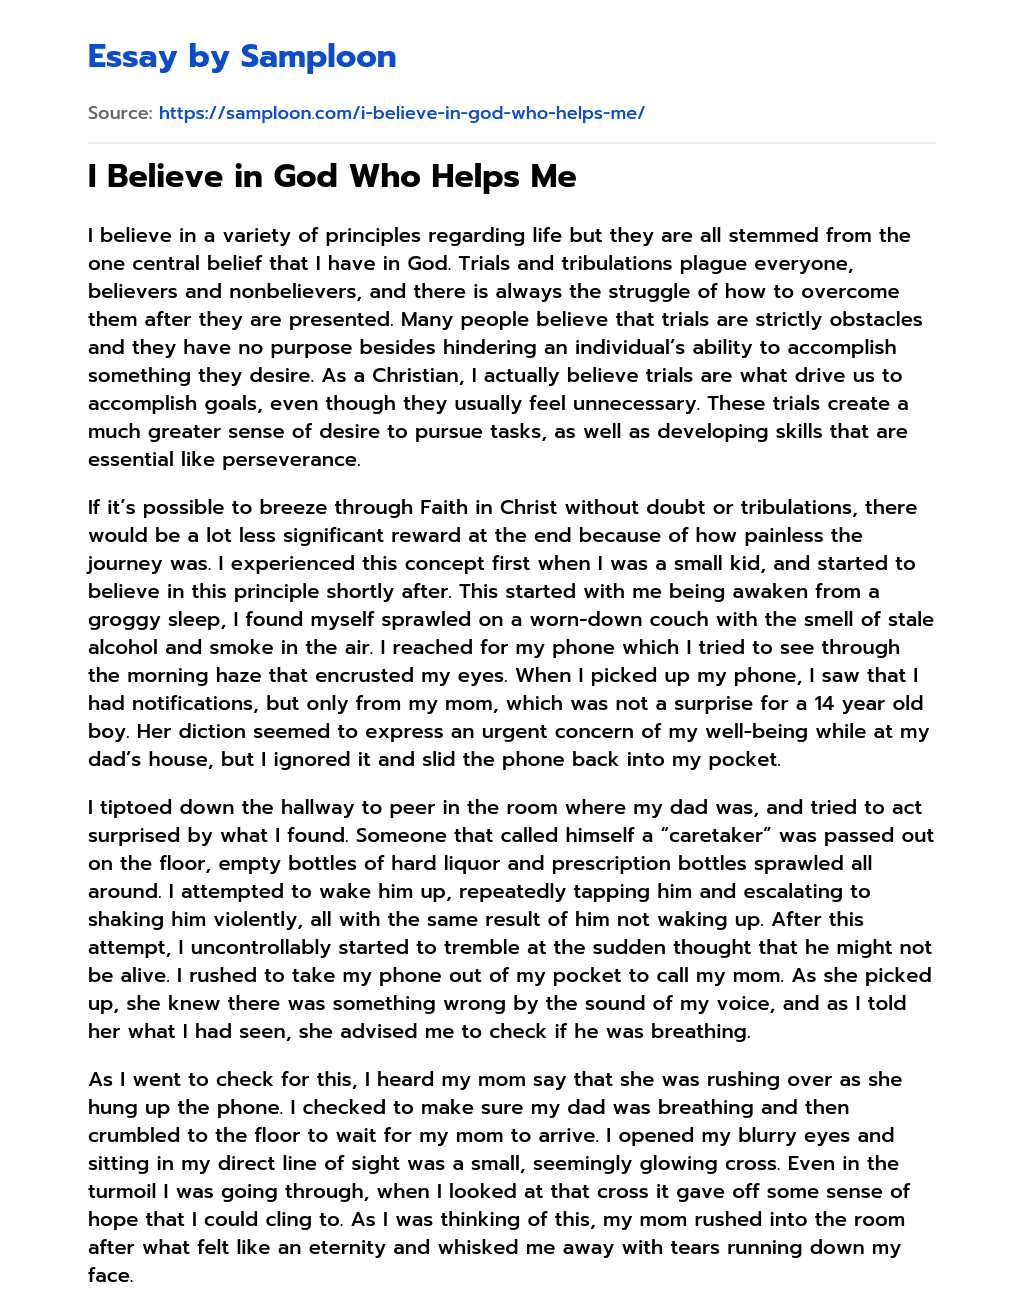 essay about my experience with god in a sacred place